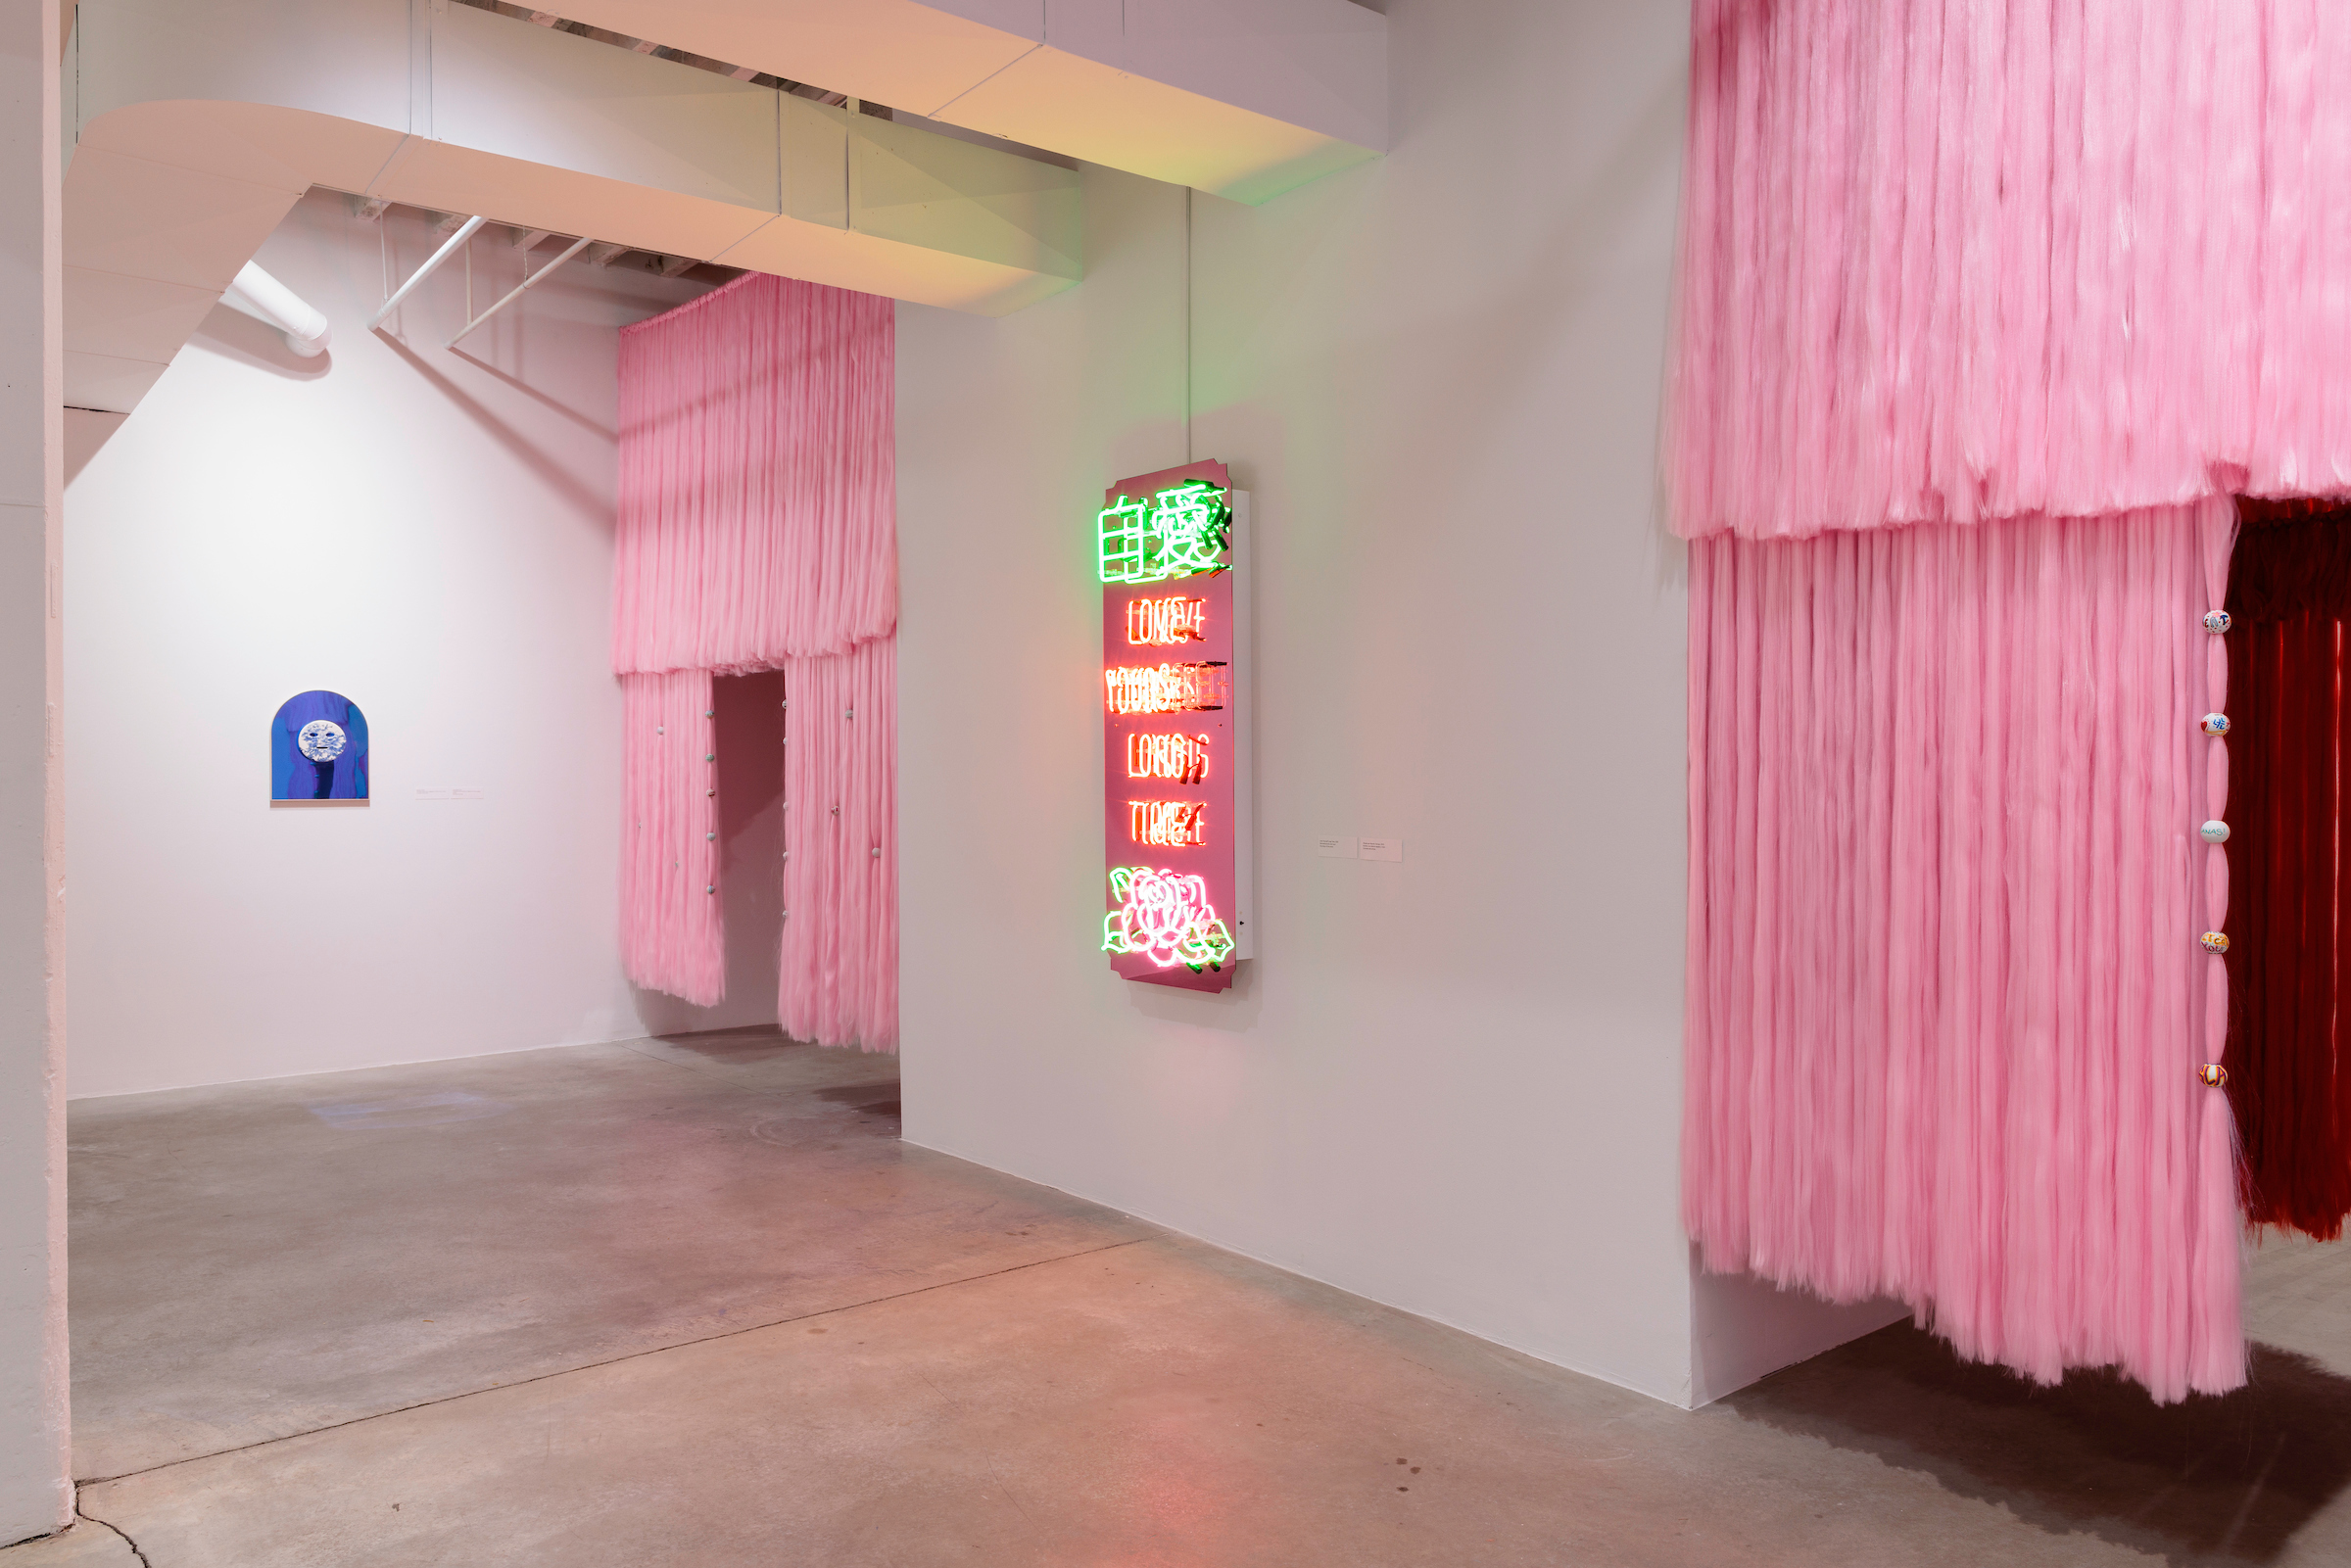 Image: Installation view of Jennifer Ling Datchuk: Eat Bitterness, 2023. In the center we can see Jennifer Ling Datchuk's piece Love Yourself Long Time, a pink-tinted mirror with neon letters that say "LOVE YOURSELF LONG TIME" in English and Chines, with a rose at the bottom. There are pink curtains on either side of the piece. Courtesy of Bemis Center for Contemporary Arts. Photography by Colin Conces.